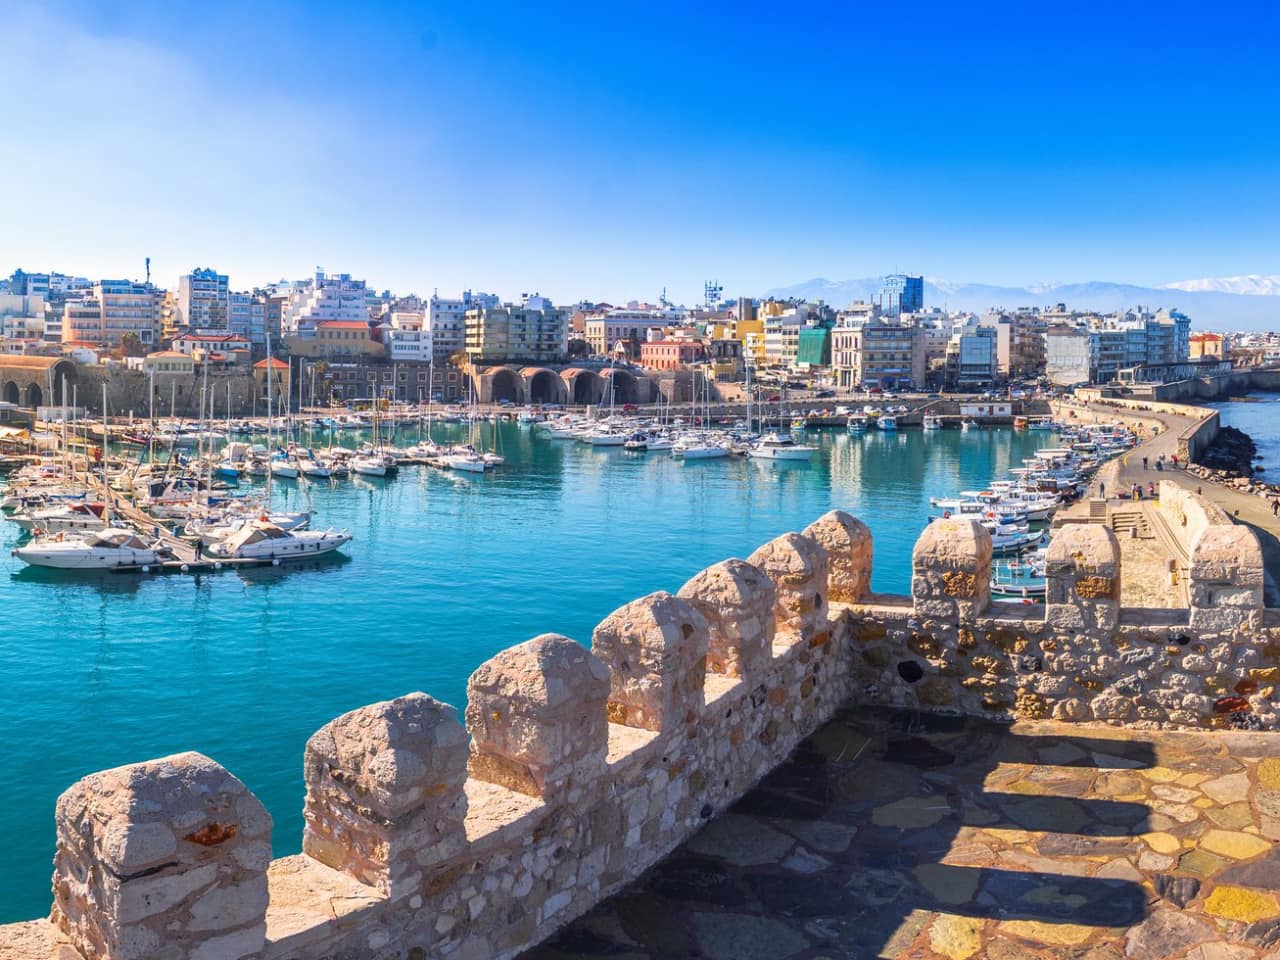 A Tour of the City of Heraklion crete, cultural tour iraklion crete, heraklion crete activiities, heraklion city tour self guided, best places to visit heraklion, what to do heraklion crete, koules fortress, morosini krini, st titos, st minas church, food tour heraklion